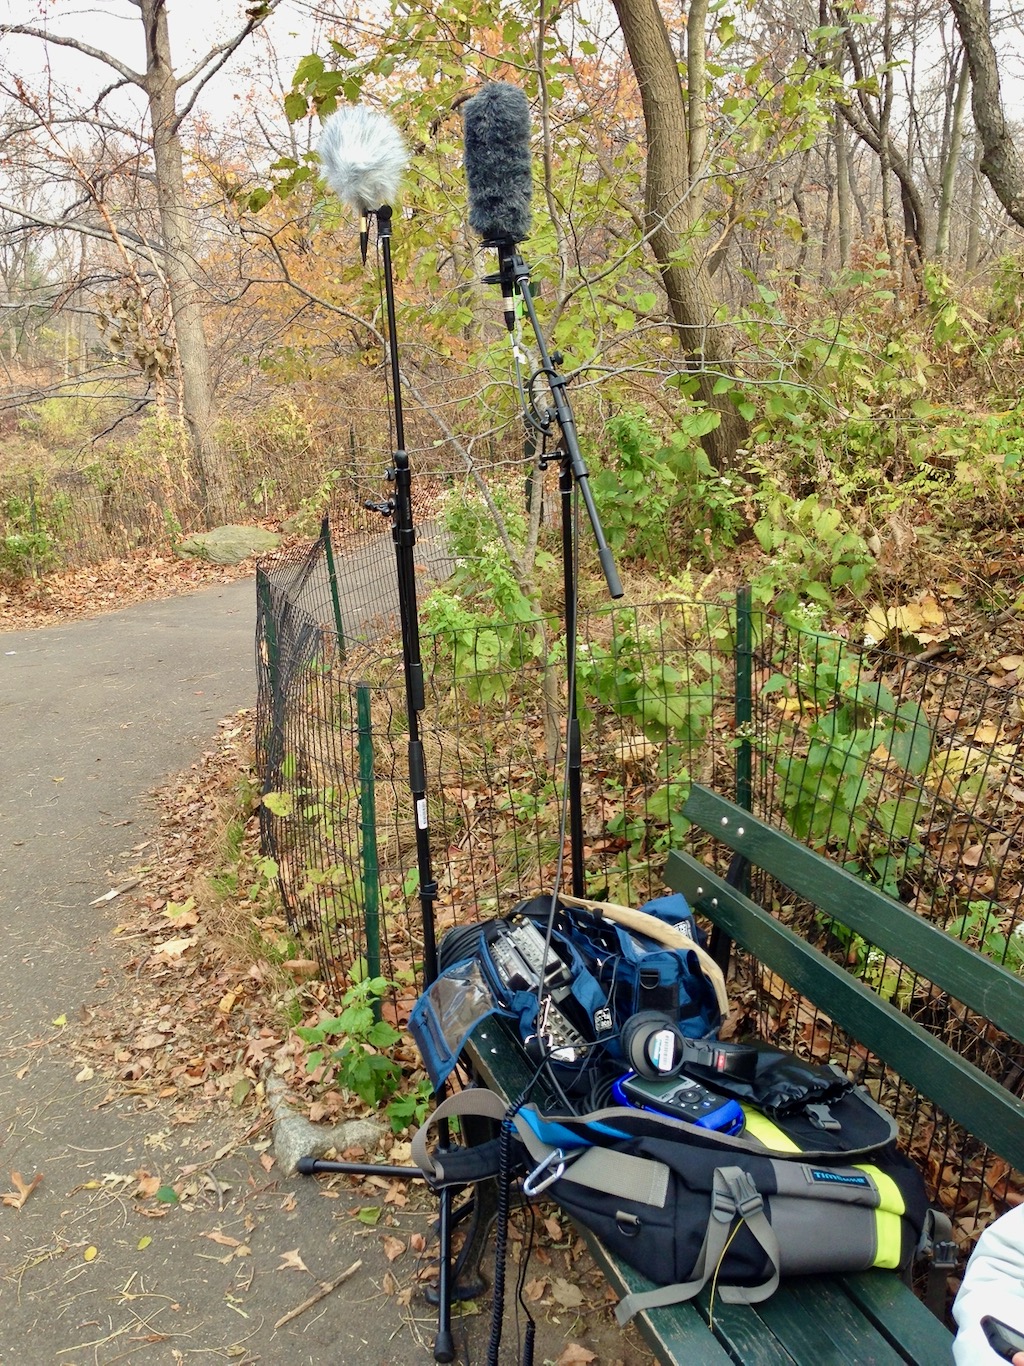 Microphones setup in Central Park in New York City to capture the soundscape